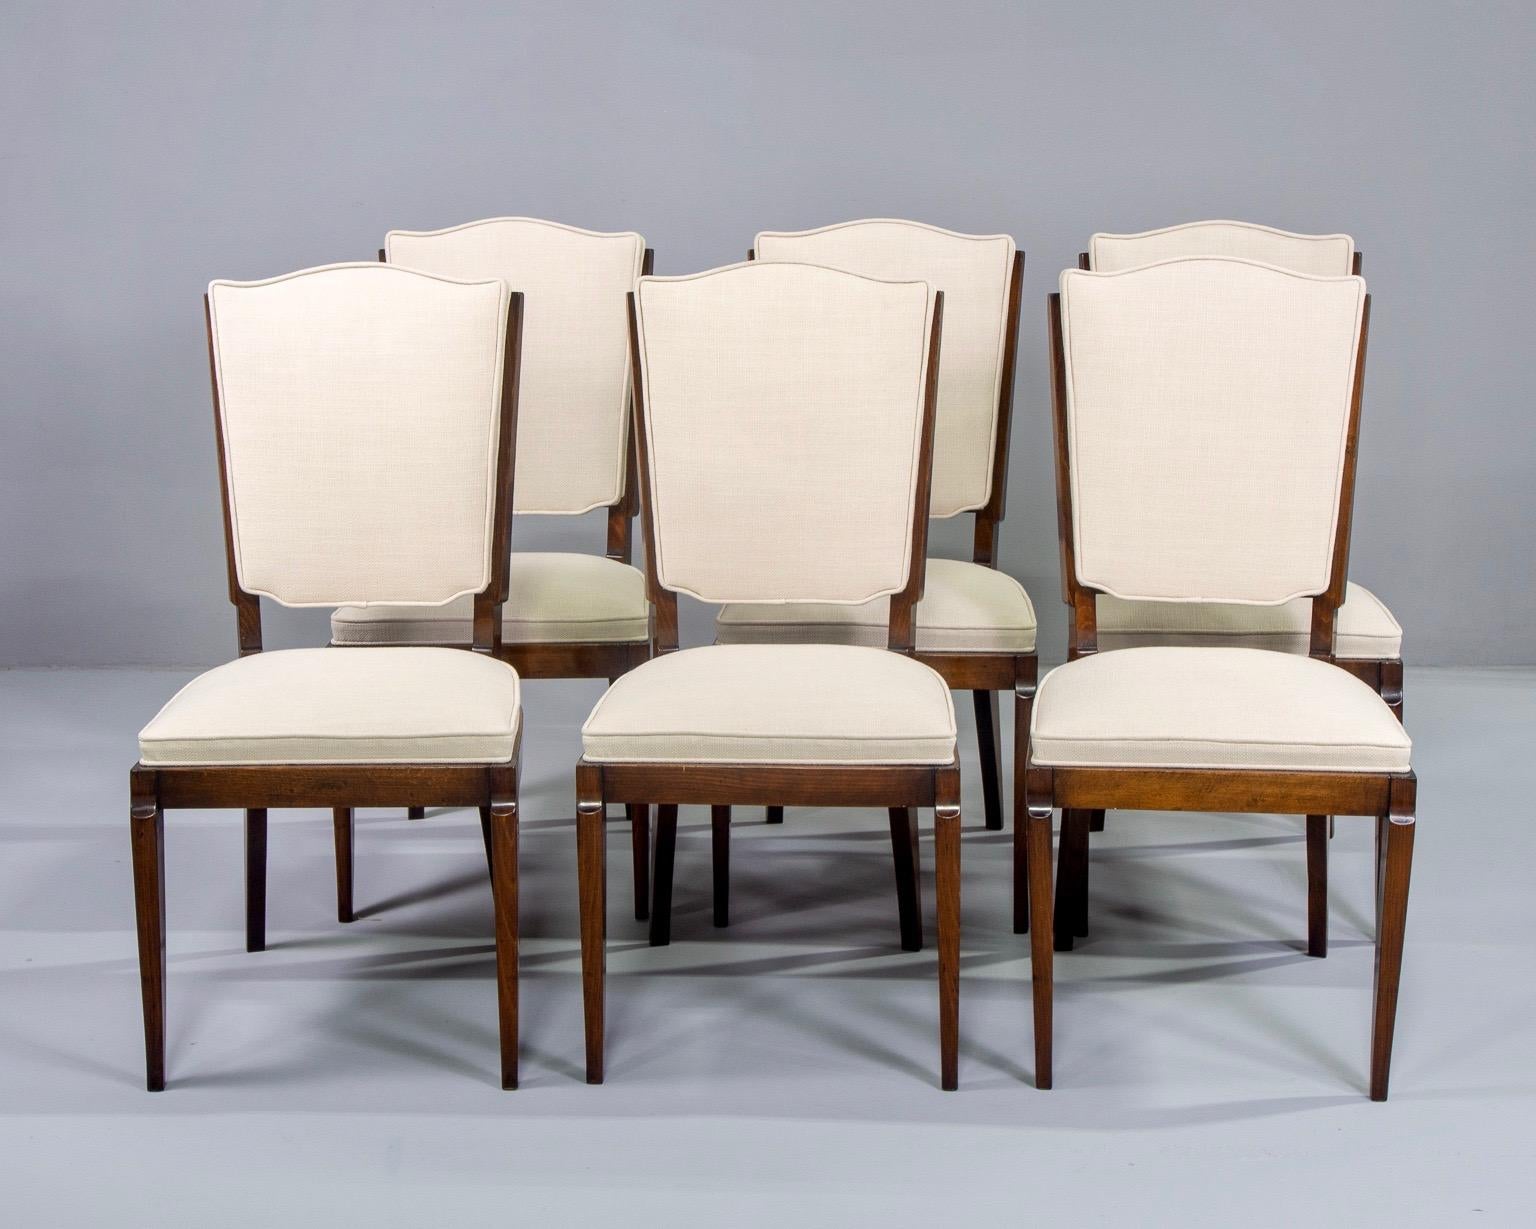 Set of six circa 1950s French dining chairs. Beech frames have been professionally polished and there is new natural color linen-blend upholstery on seats and backs. Unknown maker. Quality construction includes spring foundation in seats. Sold and